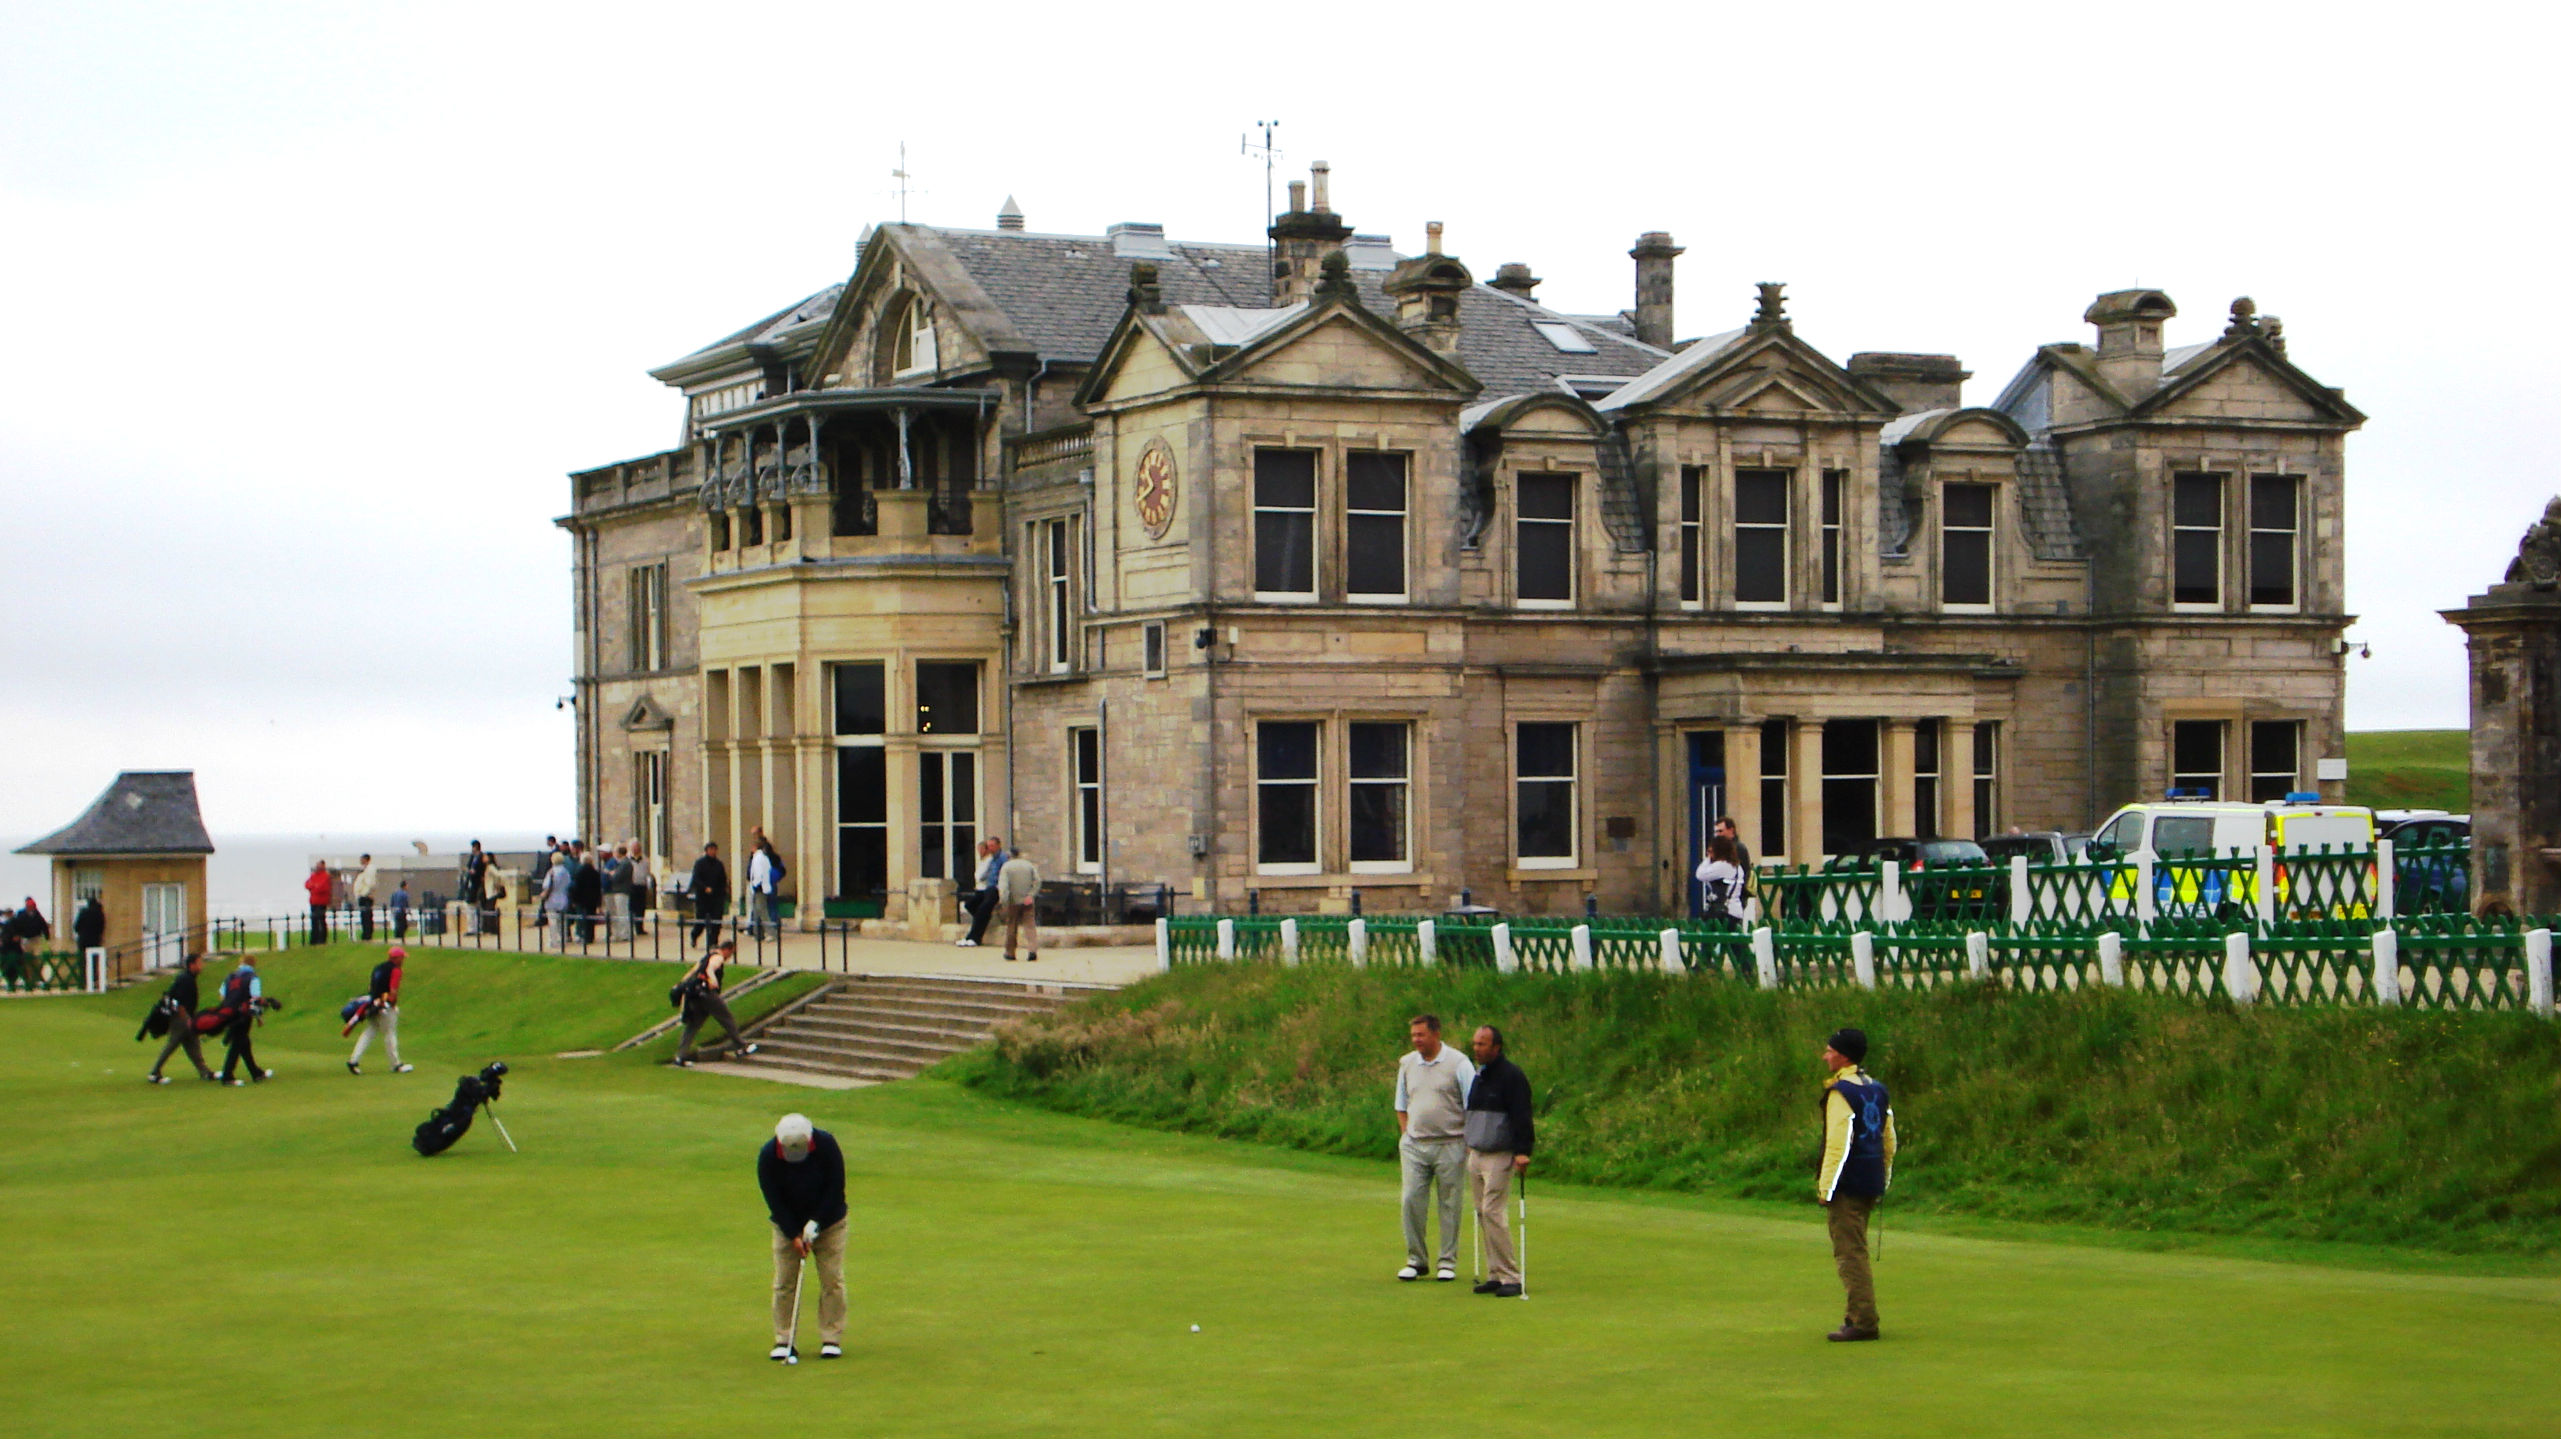 The Royal and Ancient Golf Society and the Old Course (the birthplace of golf). (Credit: Jay Lloyd)